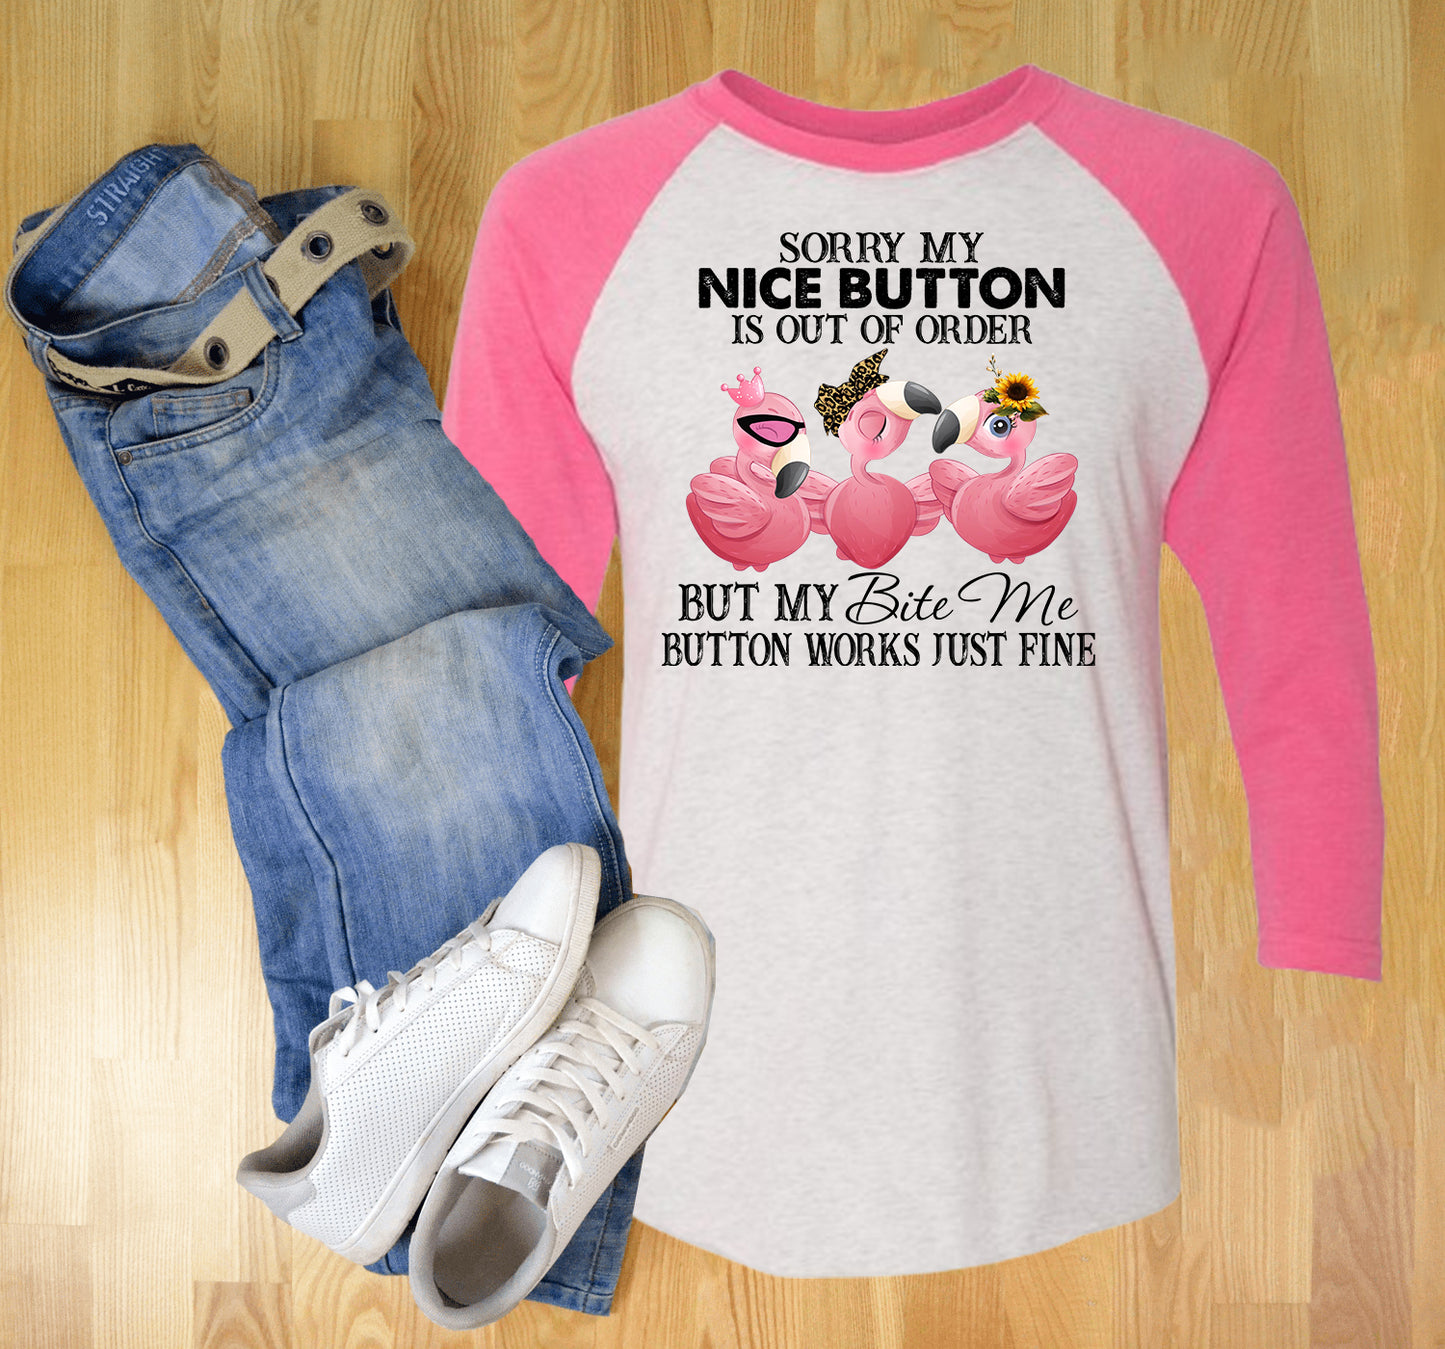 Sorry My Nice Button is Out of Order Graphic Tee